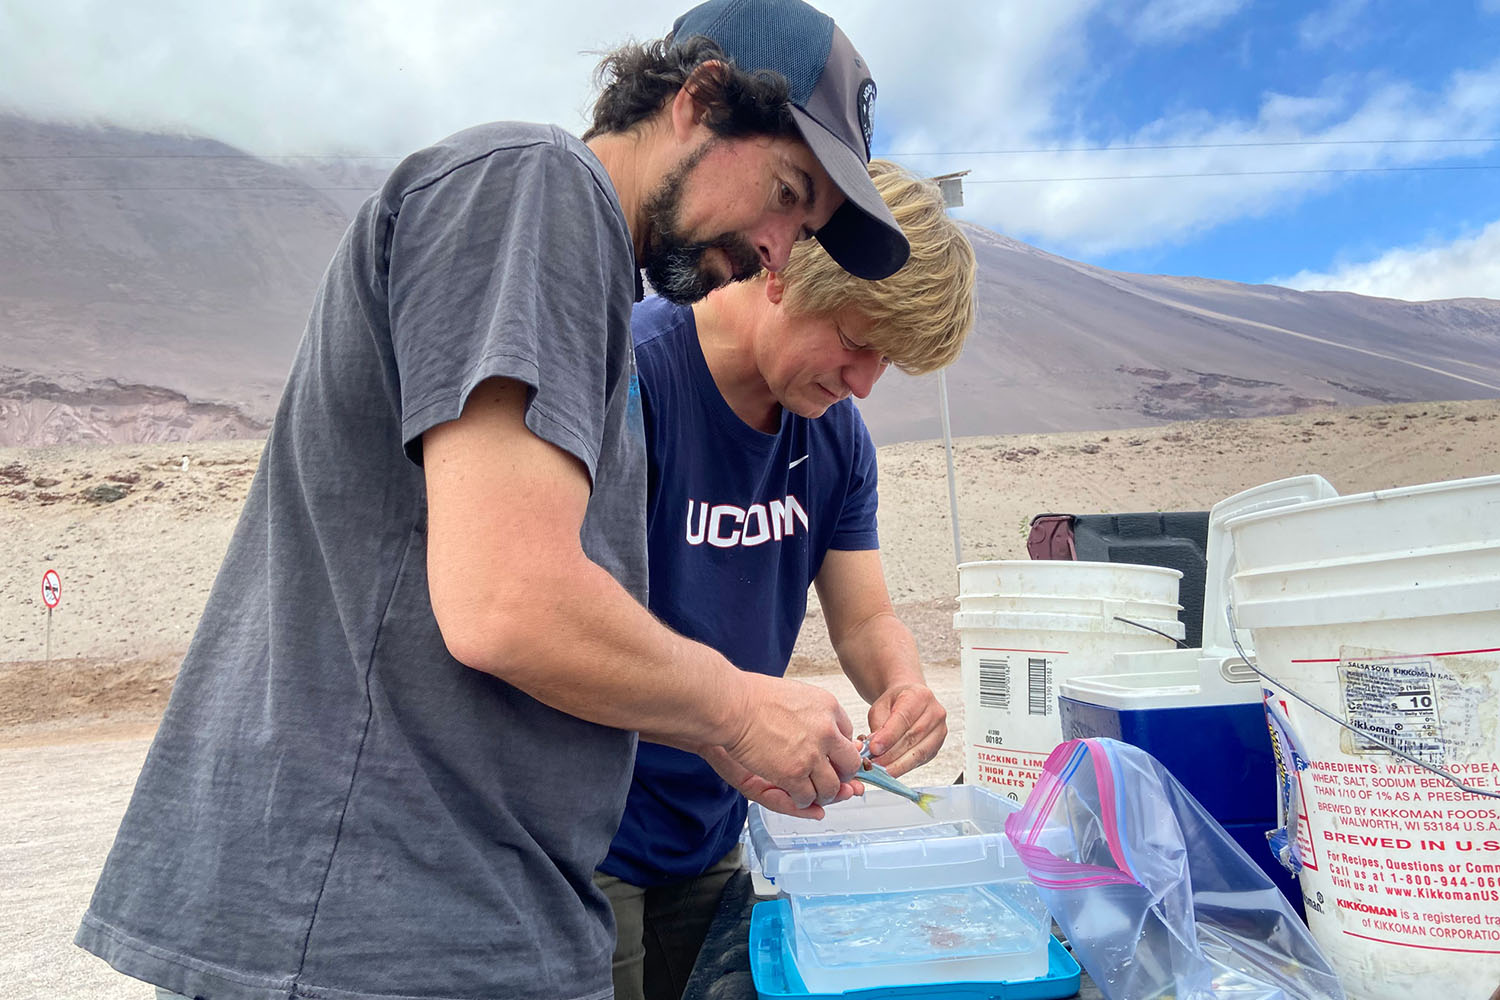 On the morning of 23 September 2023, Mauricio and Hannes begin strip-spawning recently caught silversides in their open-air laboratory on the hitch of a pick-up truck, surrounded by desert, rocks, and ocean.